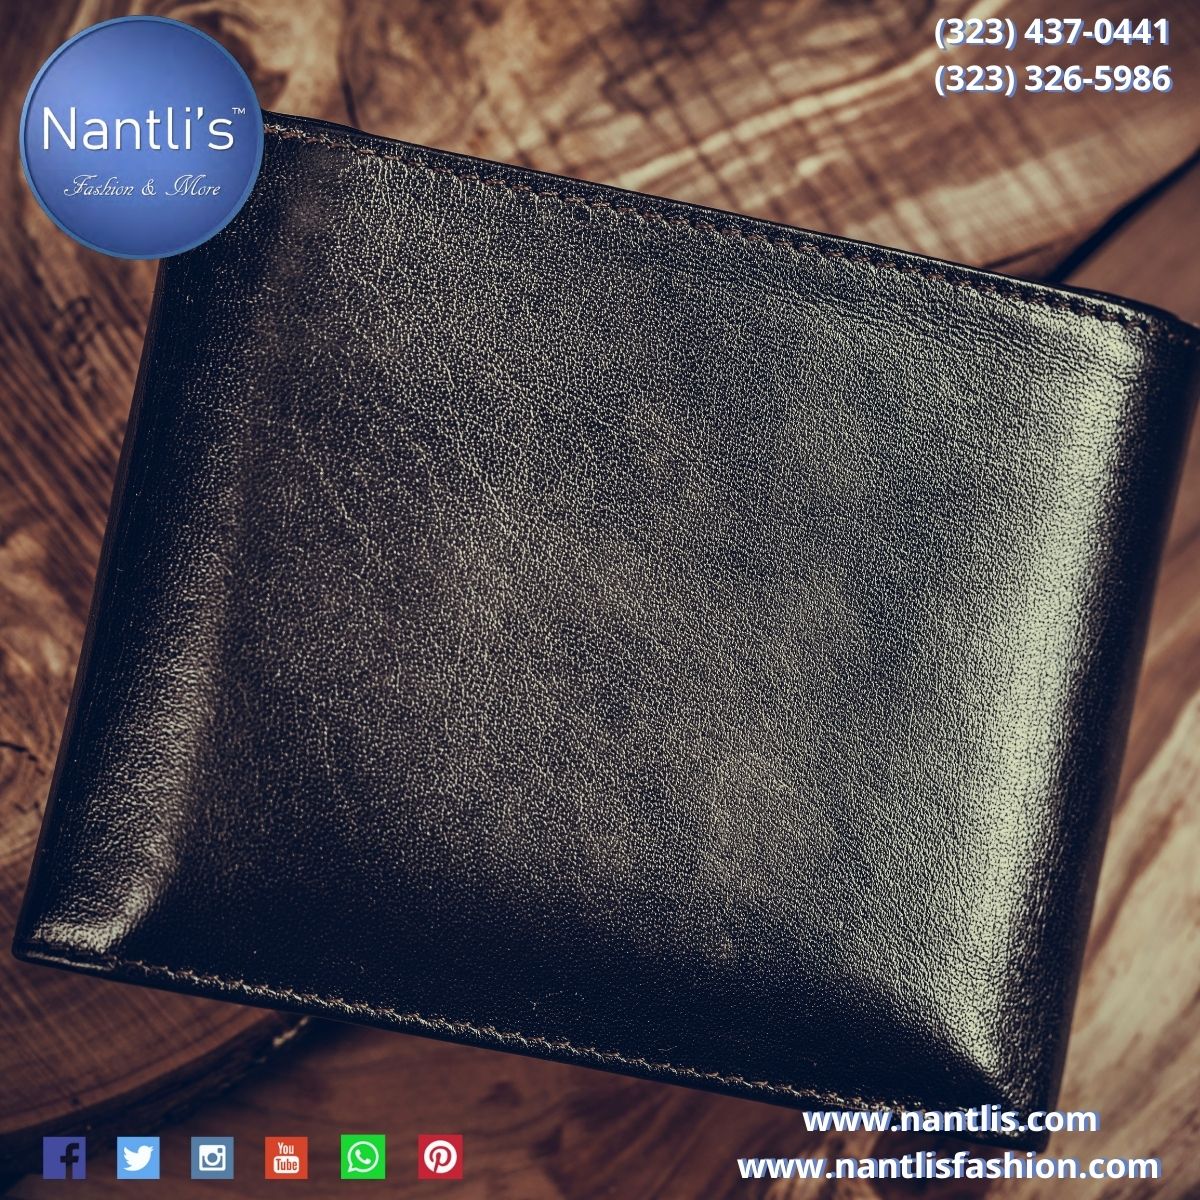 Leather Wallets Carteras de – Nantli's - Online Store | Footwear, Clothing and Accessories